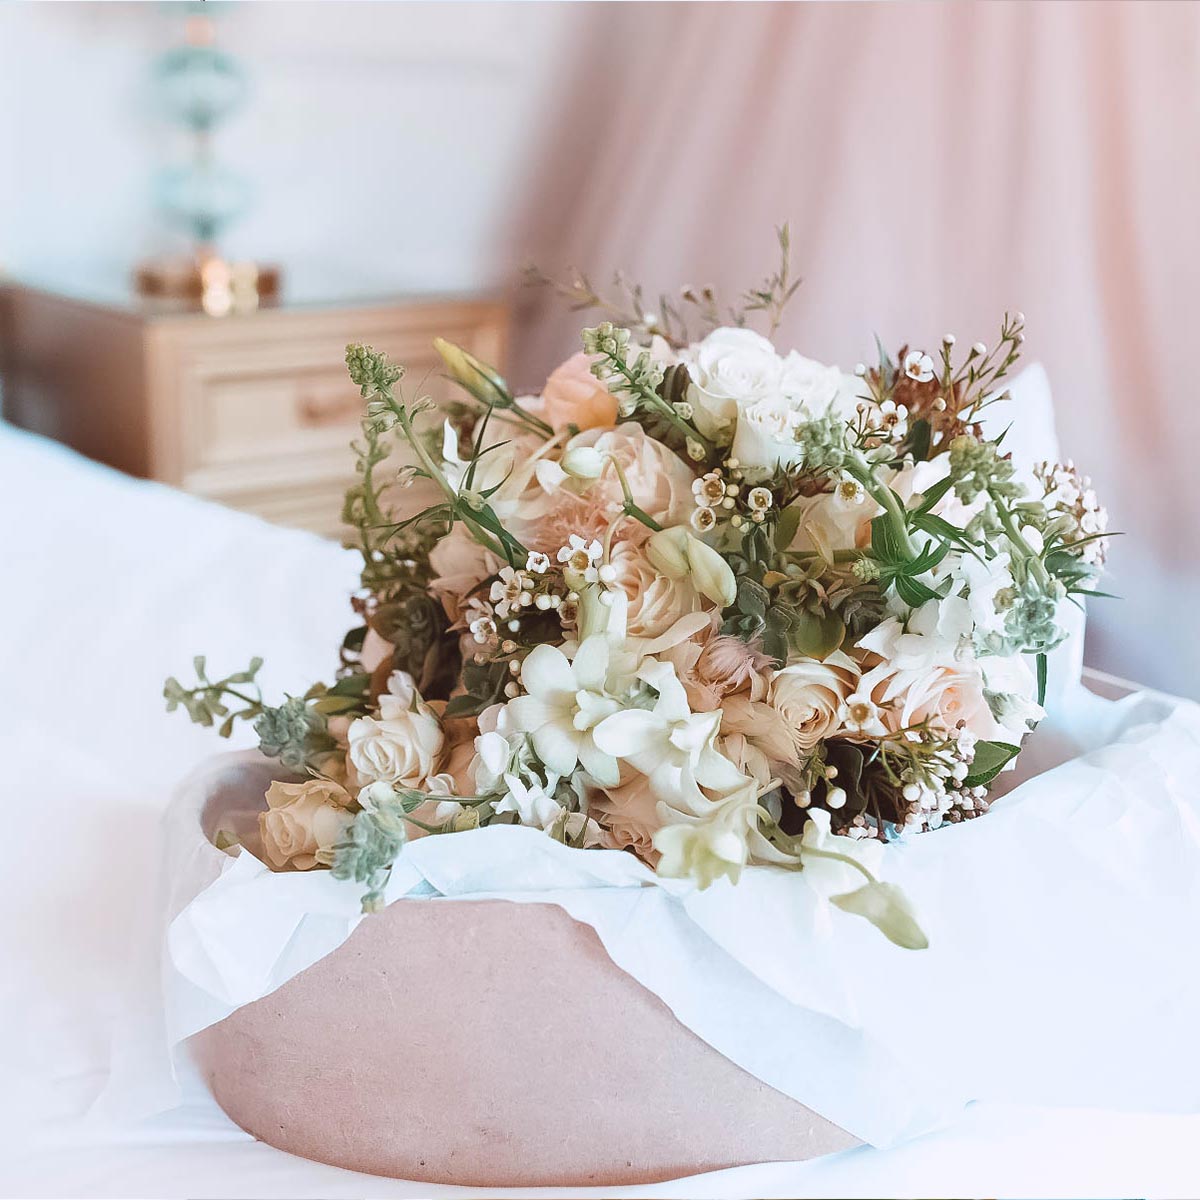 Romantic wedding bouquet with delicate white and blush flowers arranged in a soft pink vase, placed on a white cloth. Fabulous Flowers and Gifts. Weddings.